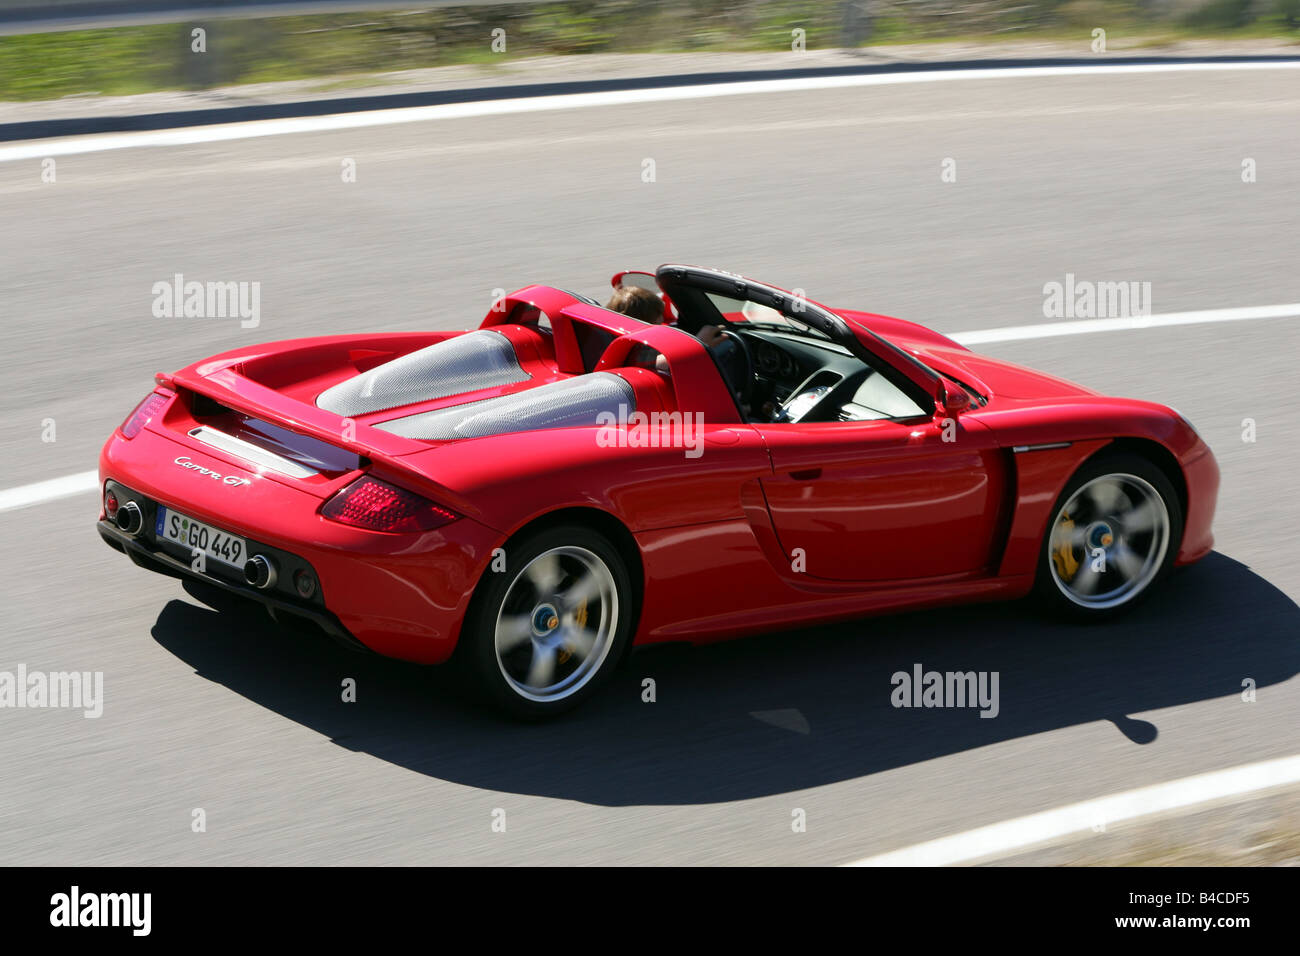 Car, Porsche Carrera GT, model year 2005-, red, Convertible, open top,  driving, diagonal from the back, side view, country road Stock Photo - Alamy